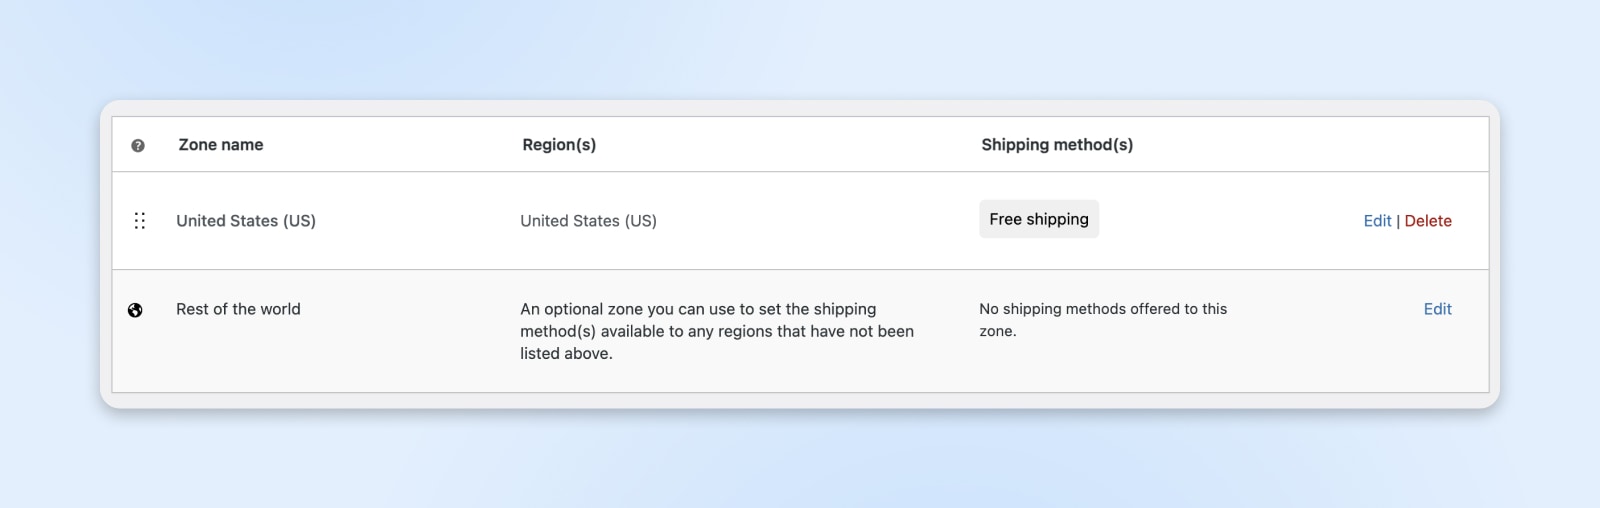 screenshot of the zone name, region, and shipping methods available for each zone with the United States as a default